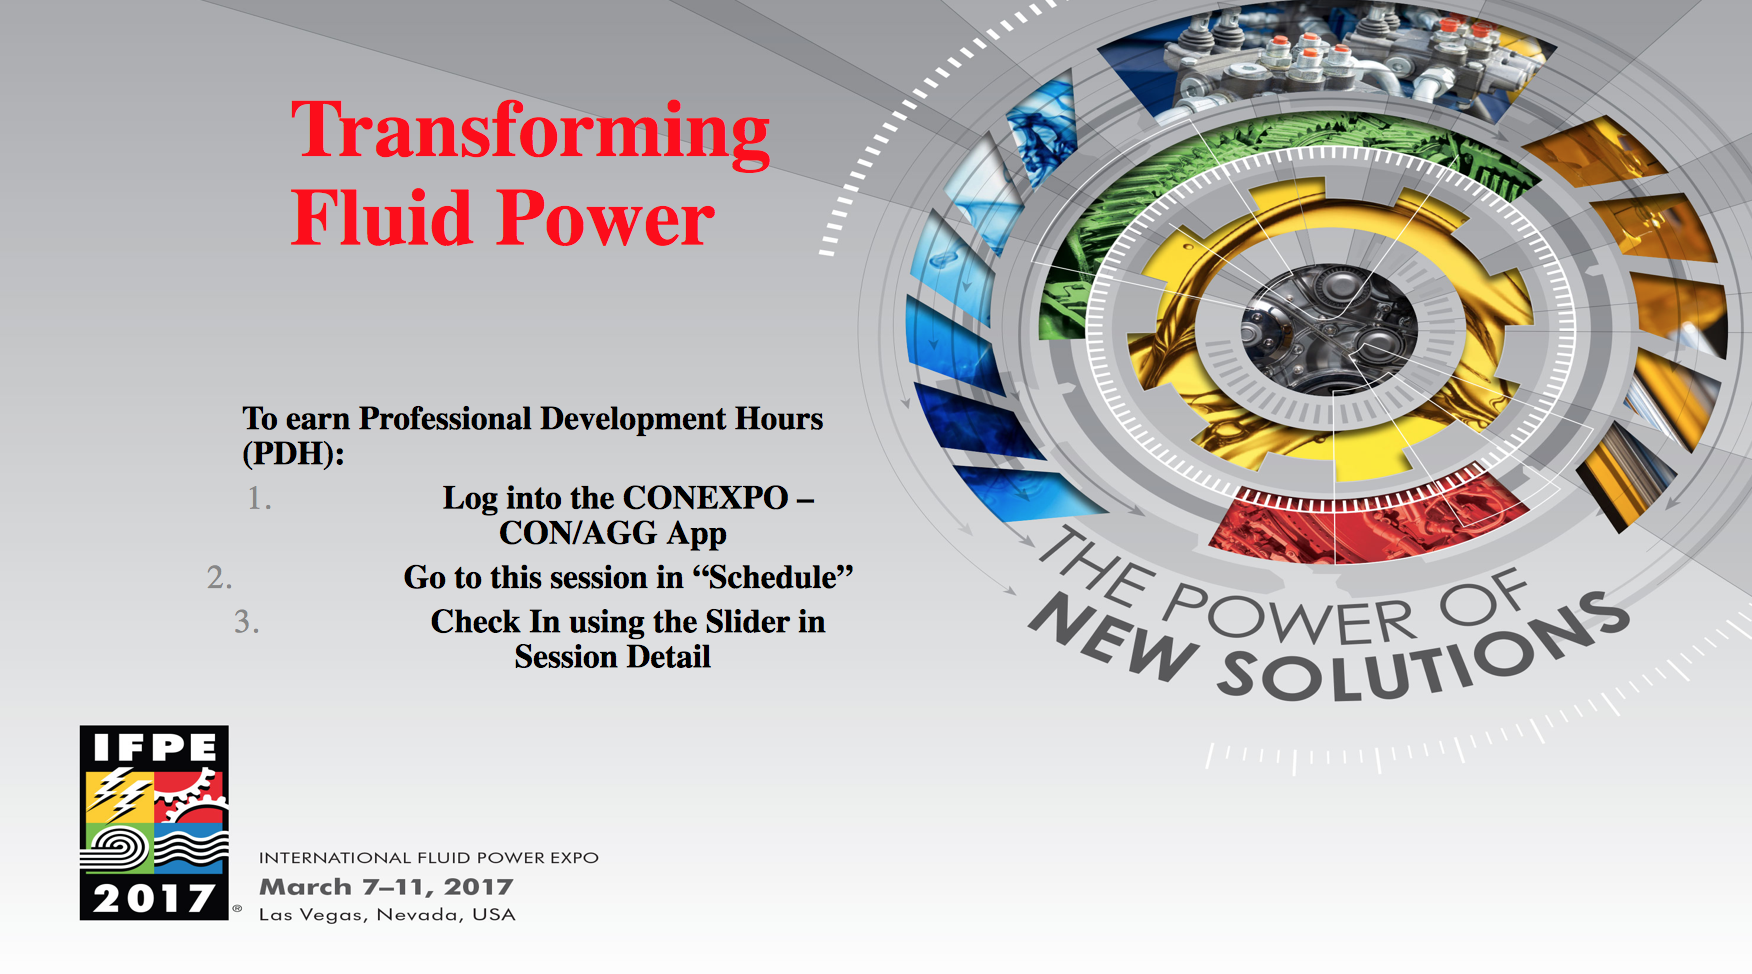 Download the Transforming Fluid Power PowerPoint